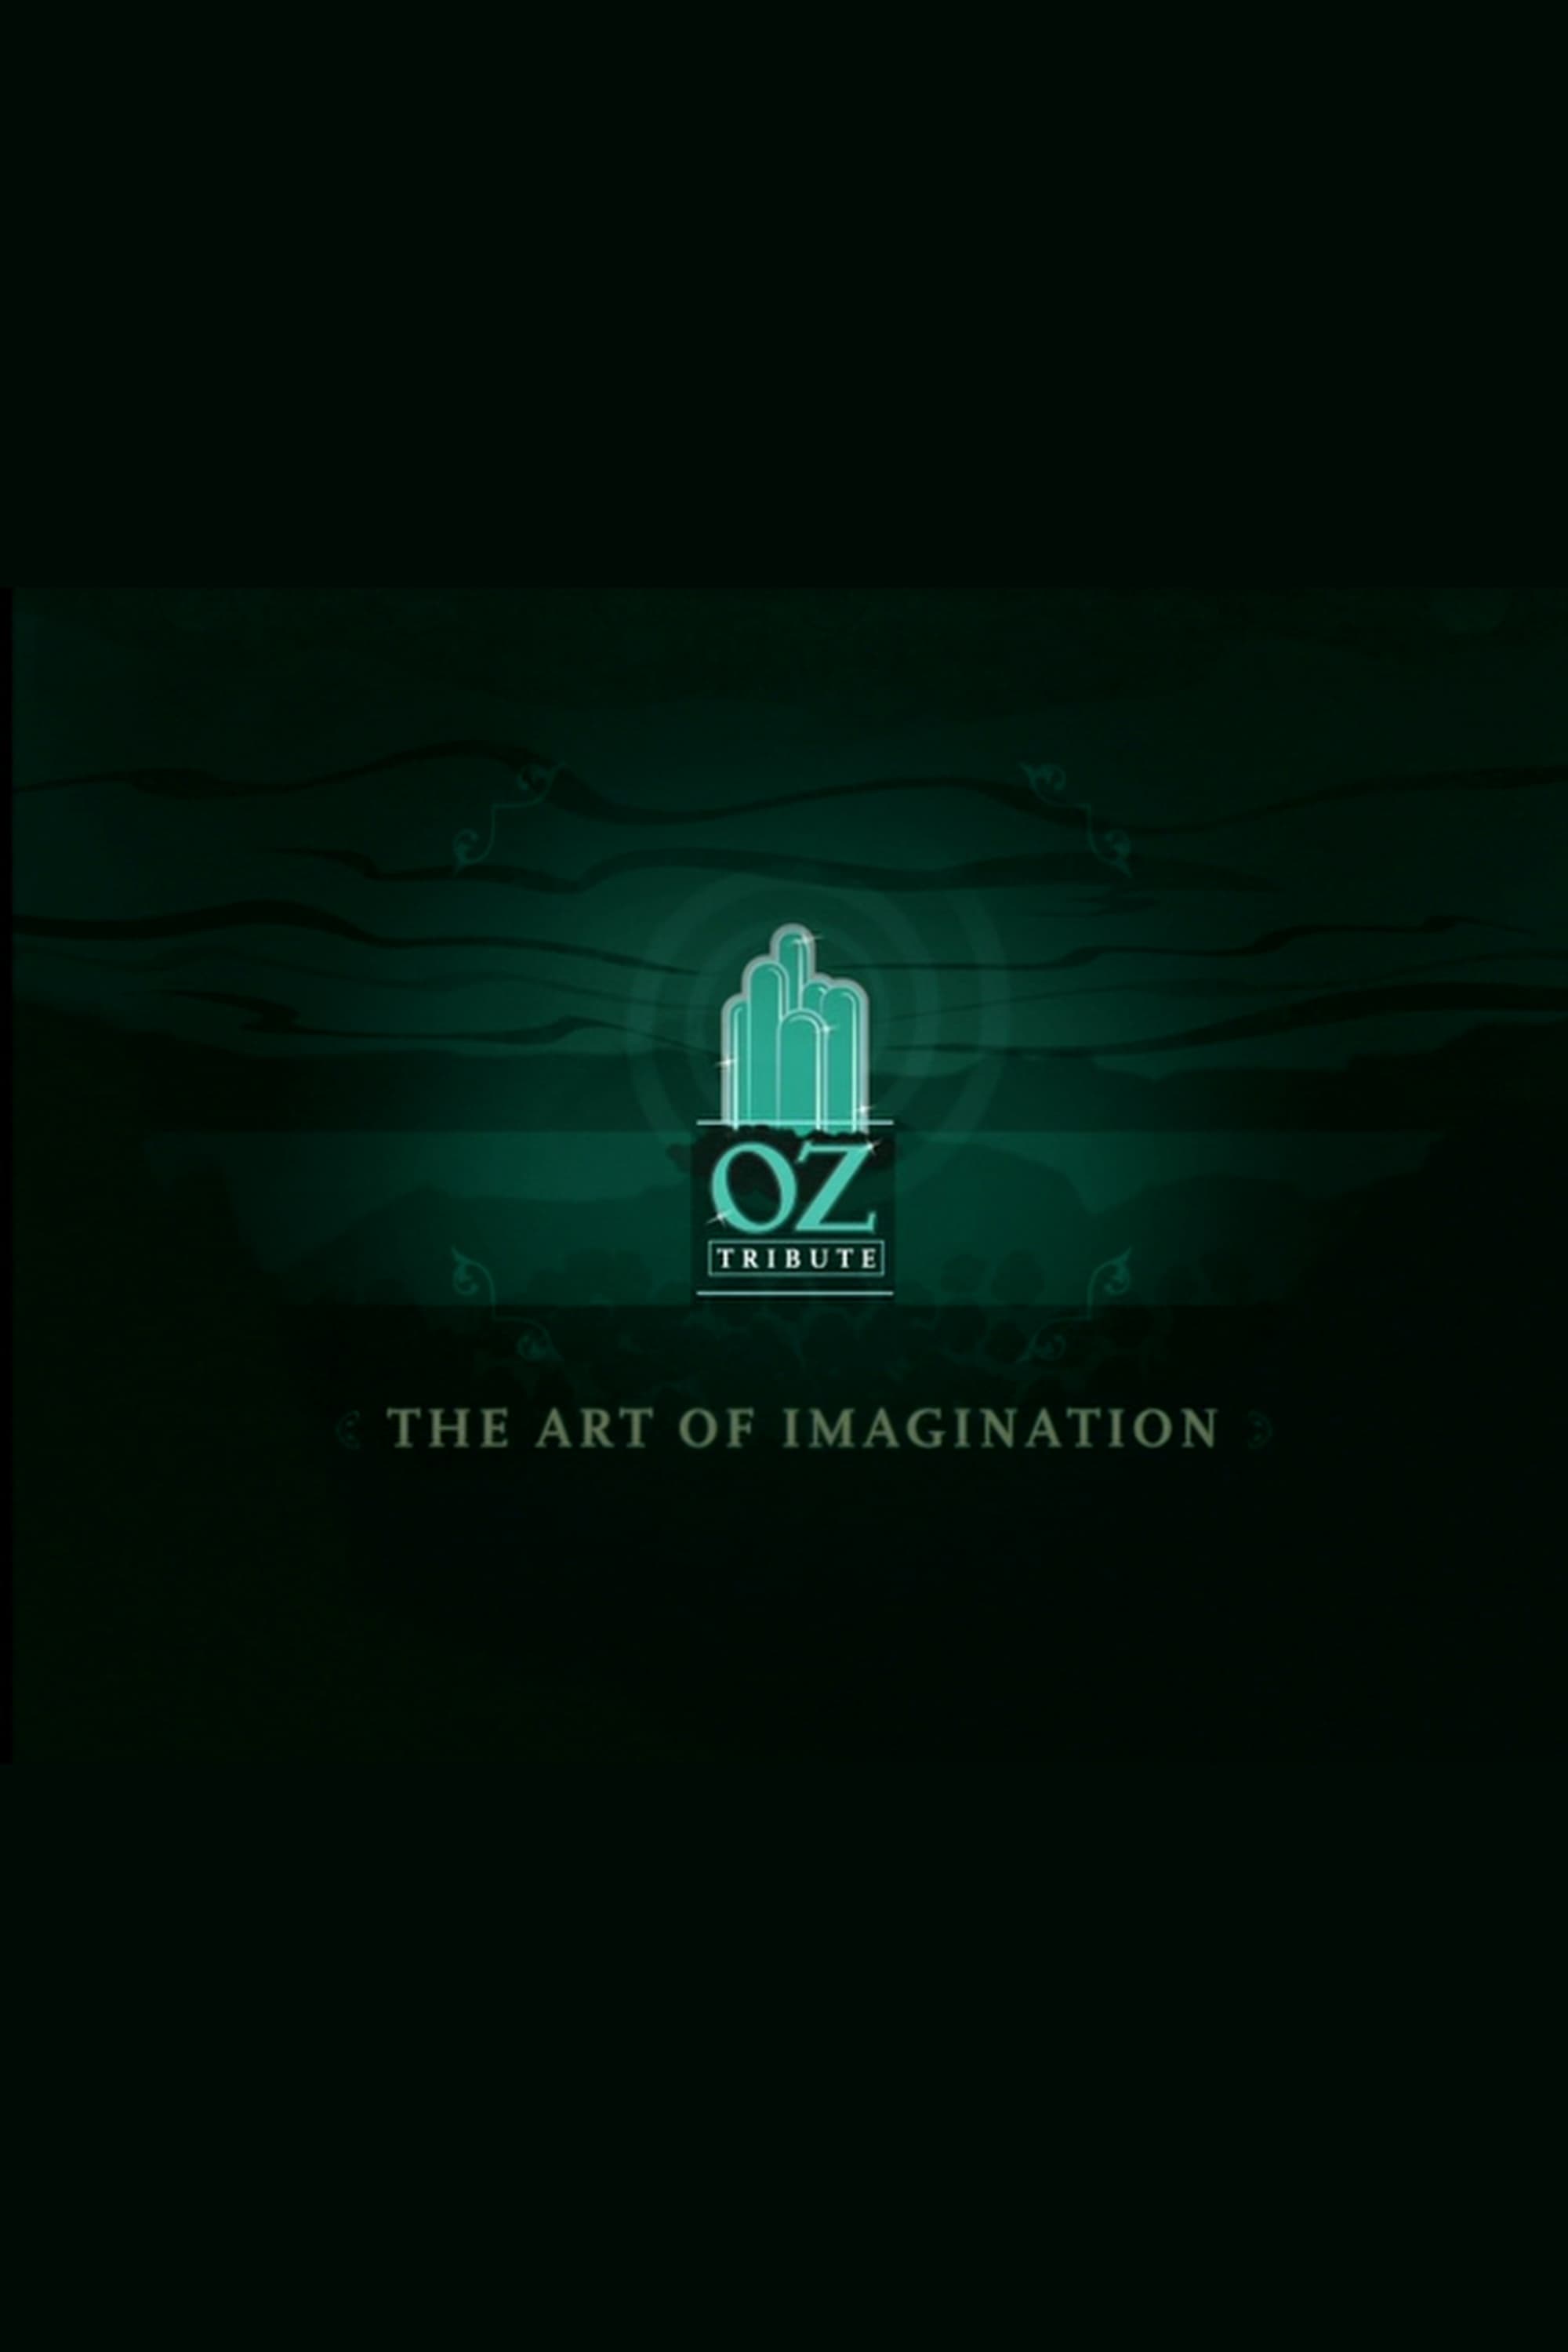 The Art of Imagination: A Tribute to Oz (2005)